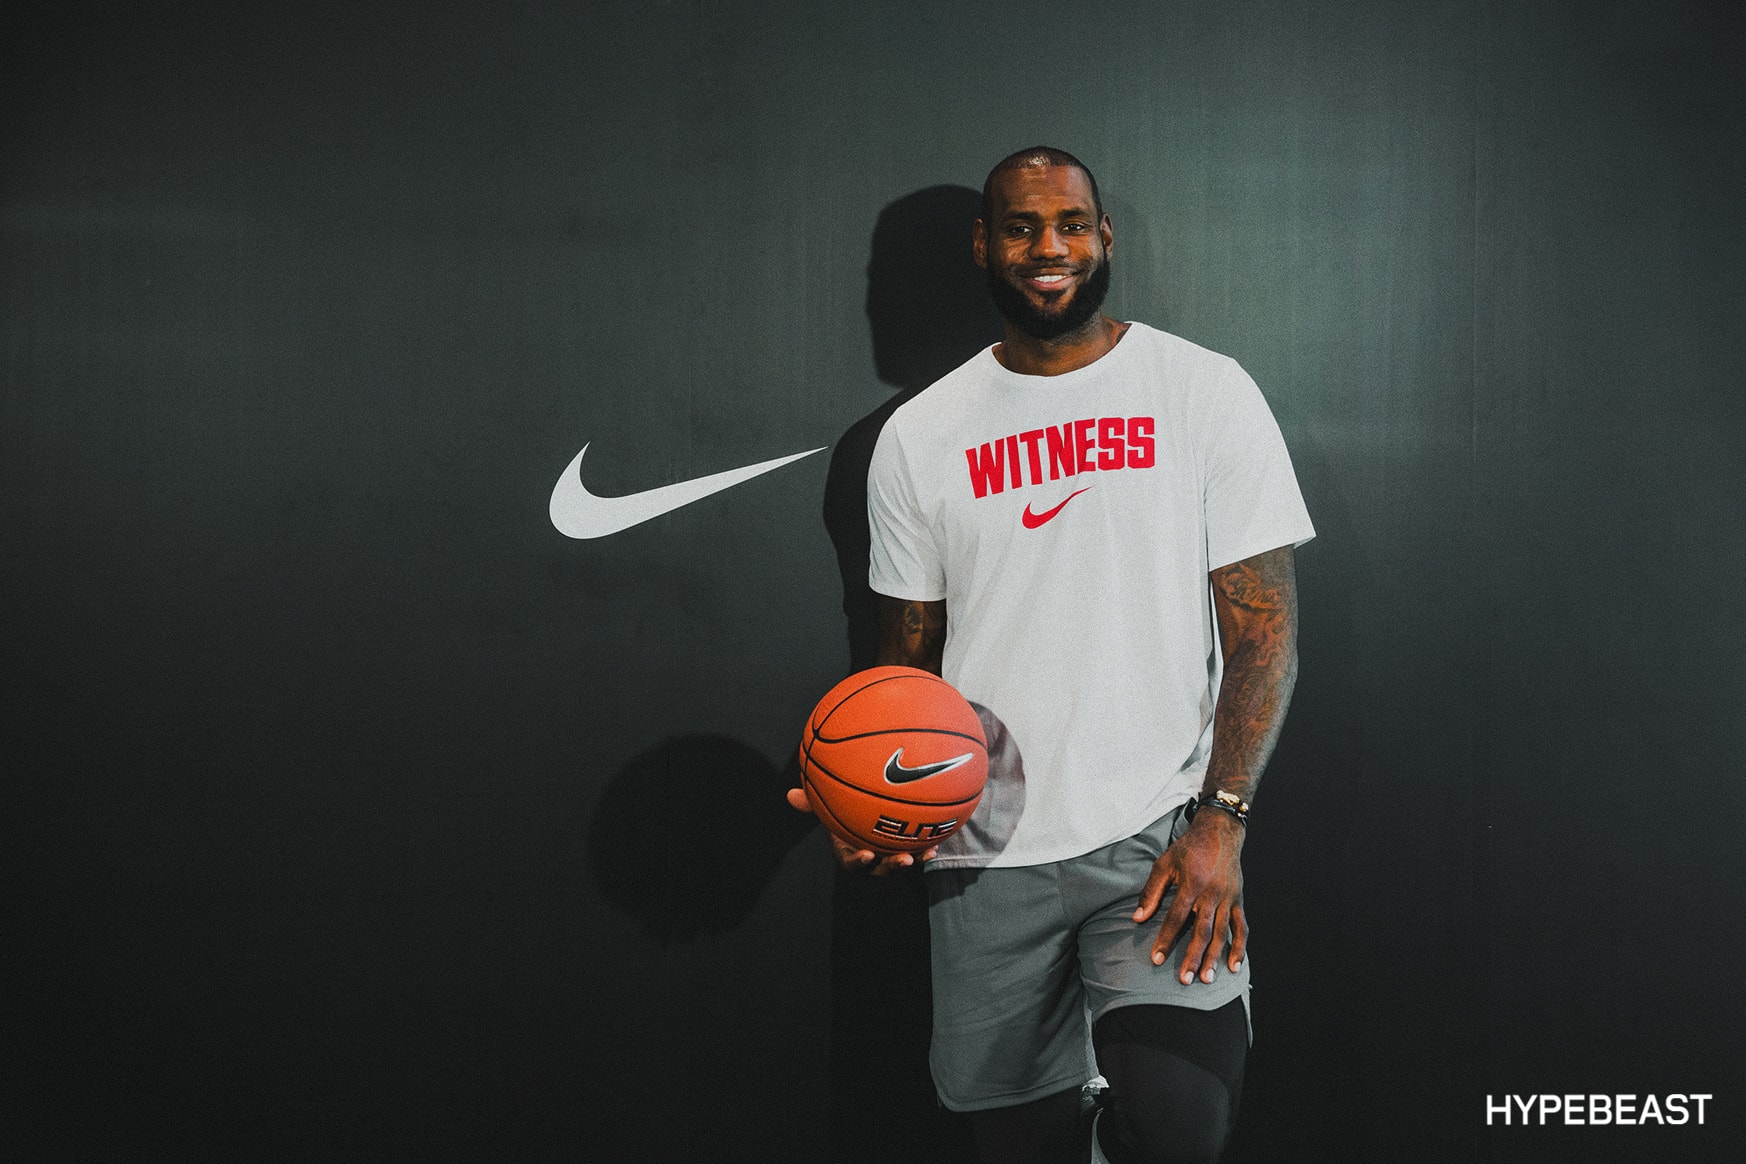 LeBron James pays tribute to Virgil Abloh by giving fans a closer